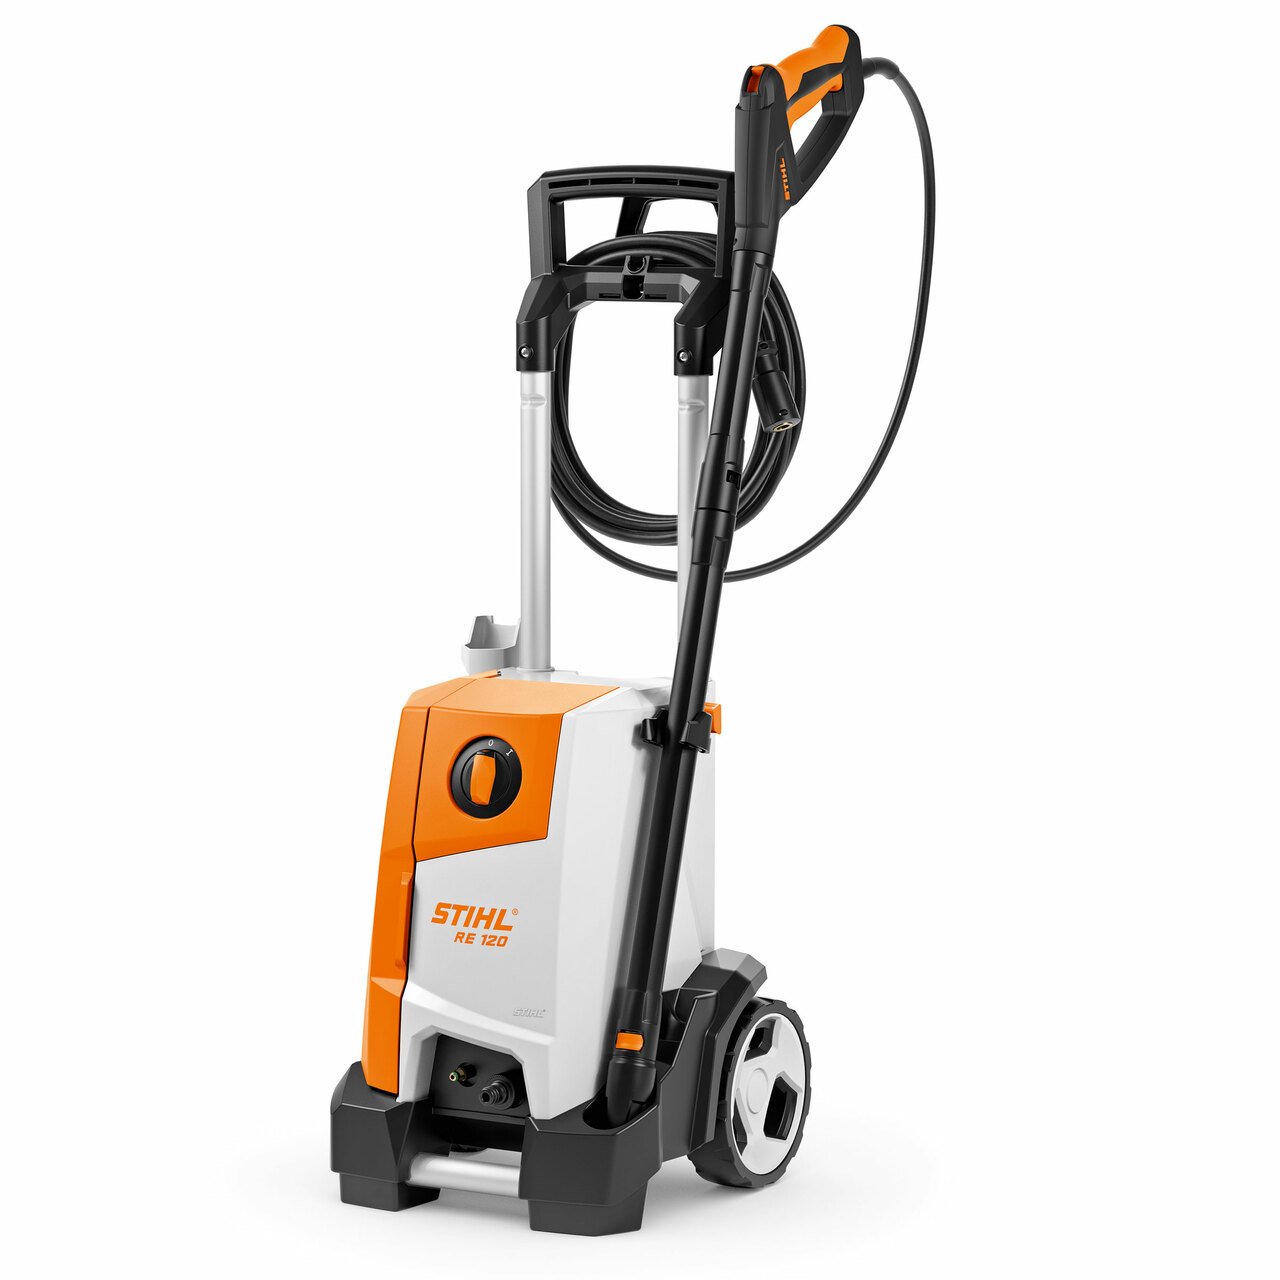 Image of Stihl <br><strong>RE 120 Electric Pressure Washer 125 Bar</strong>